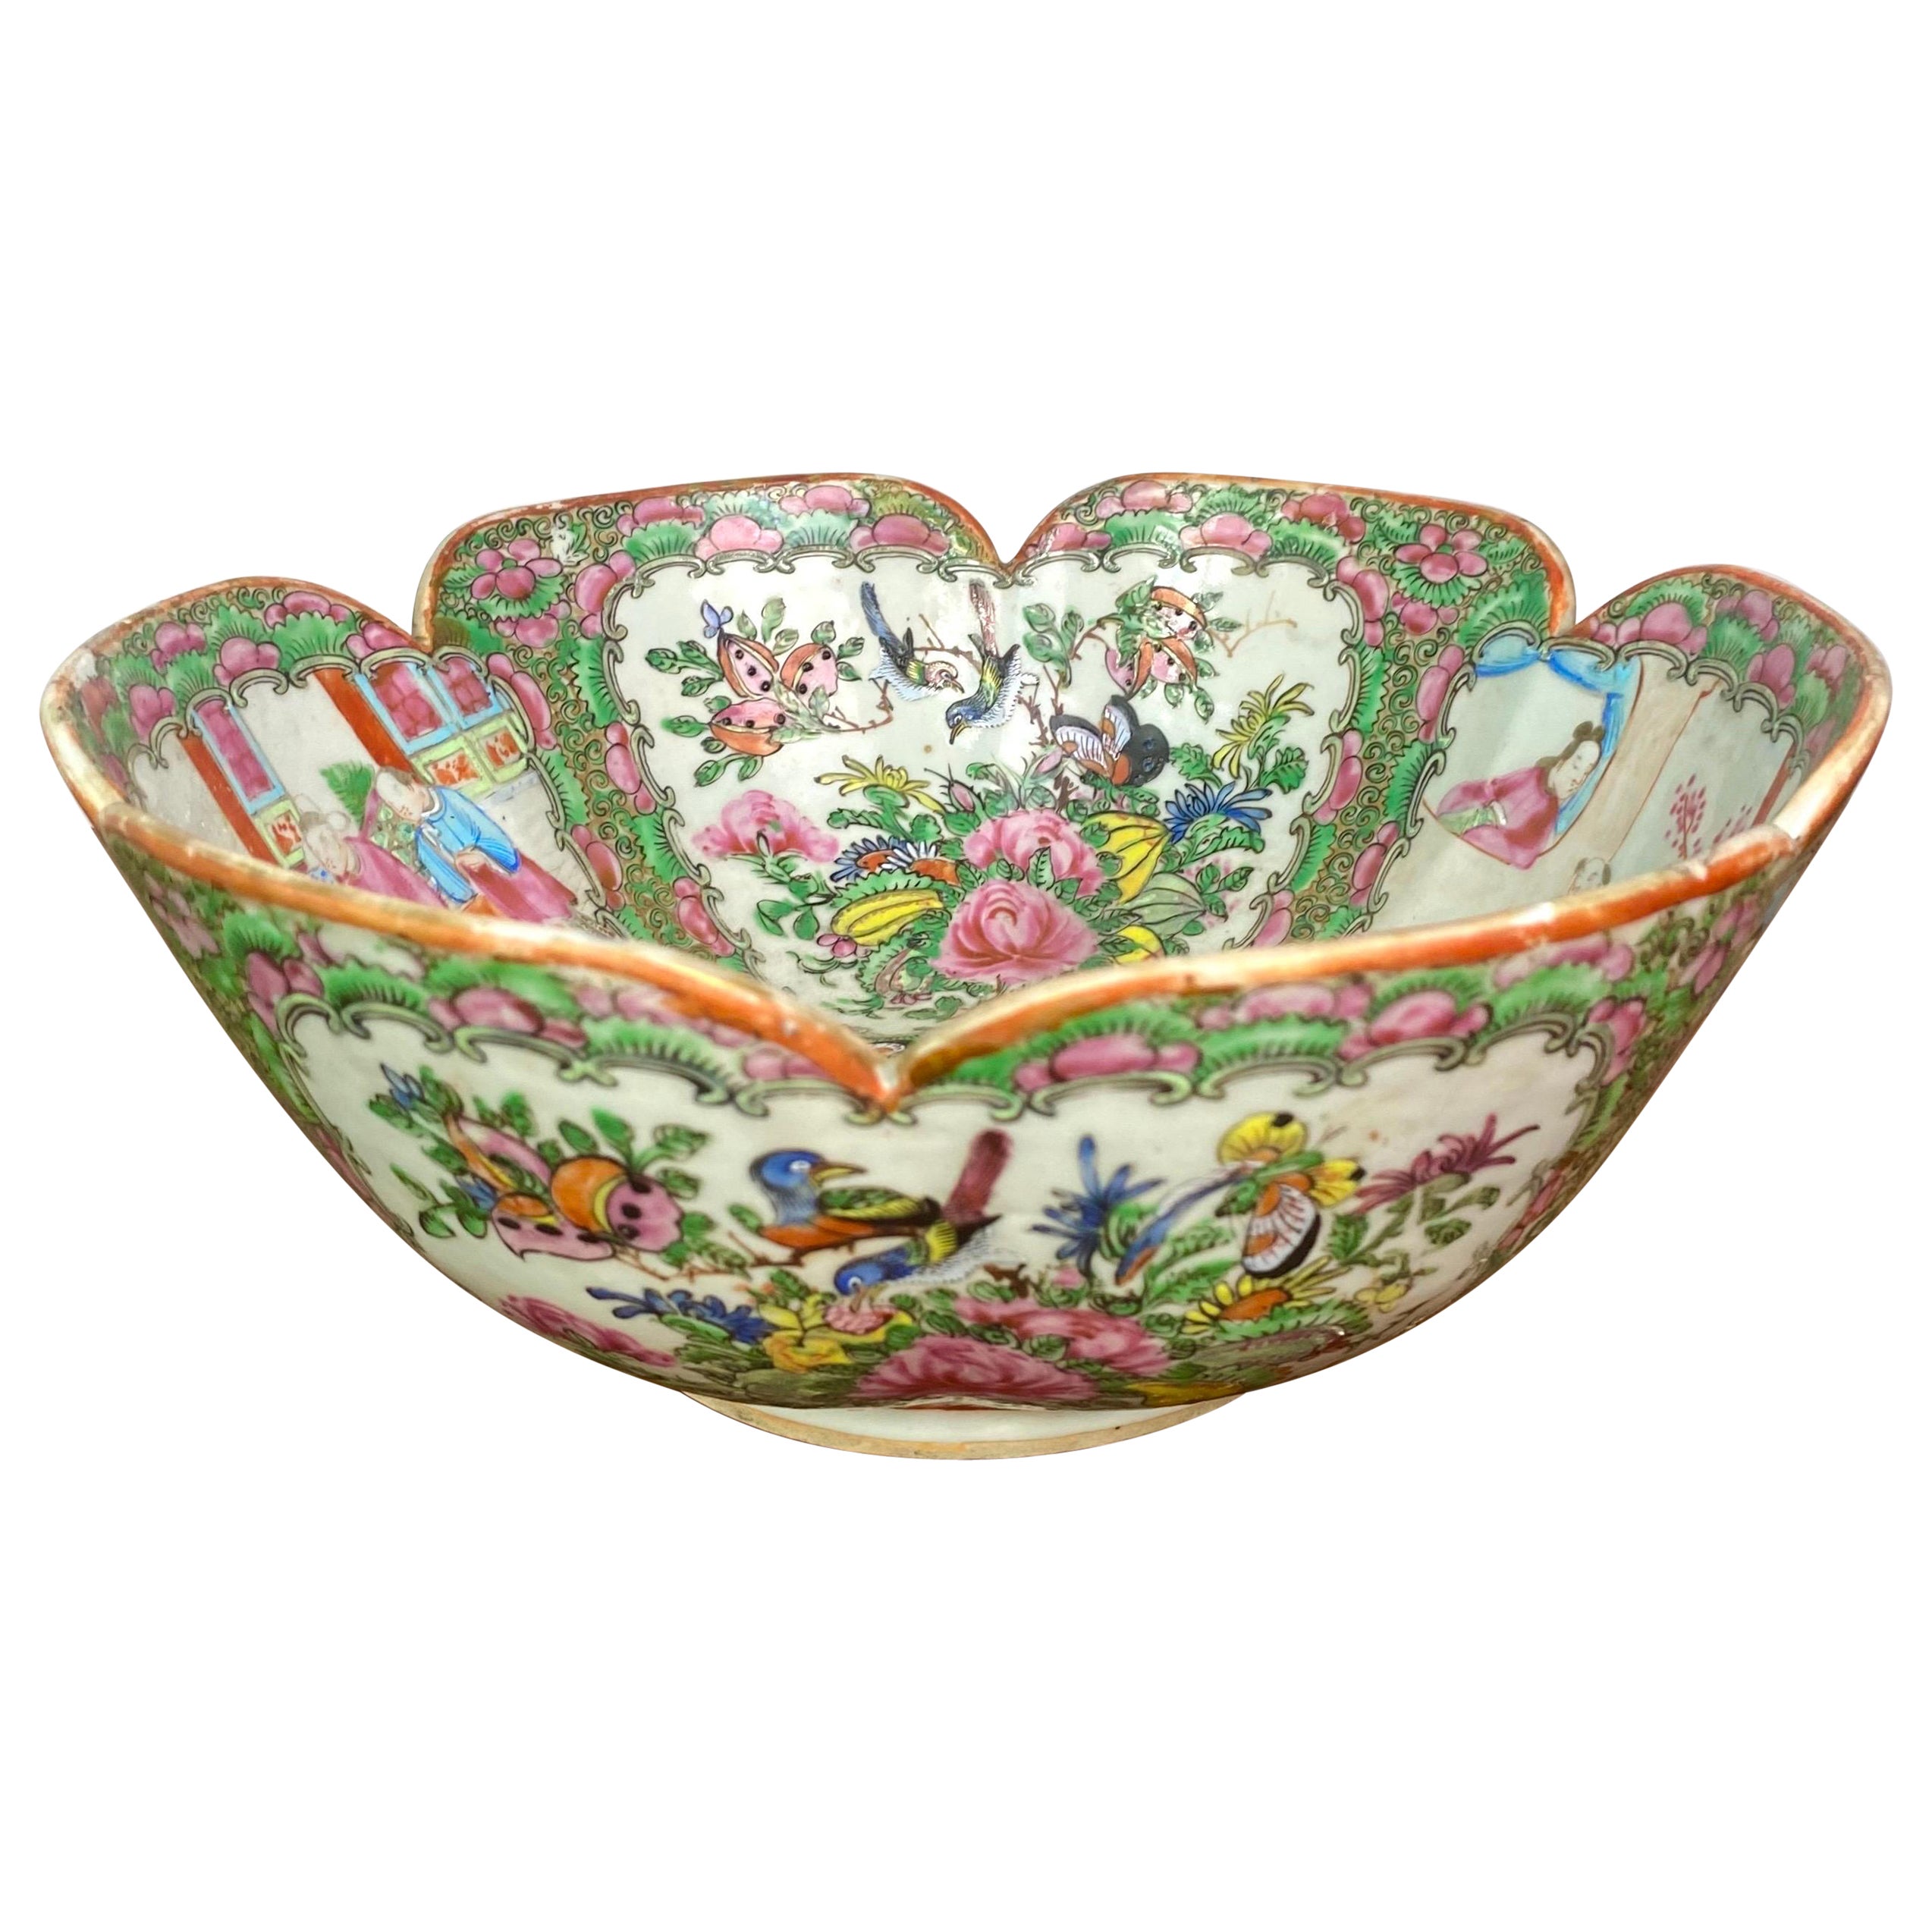 Bowl - cup - salad bowl - Famille Rose - Canton - China 19th Qing For Sale